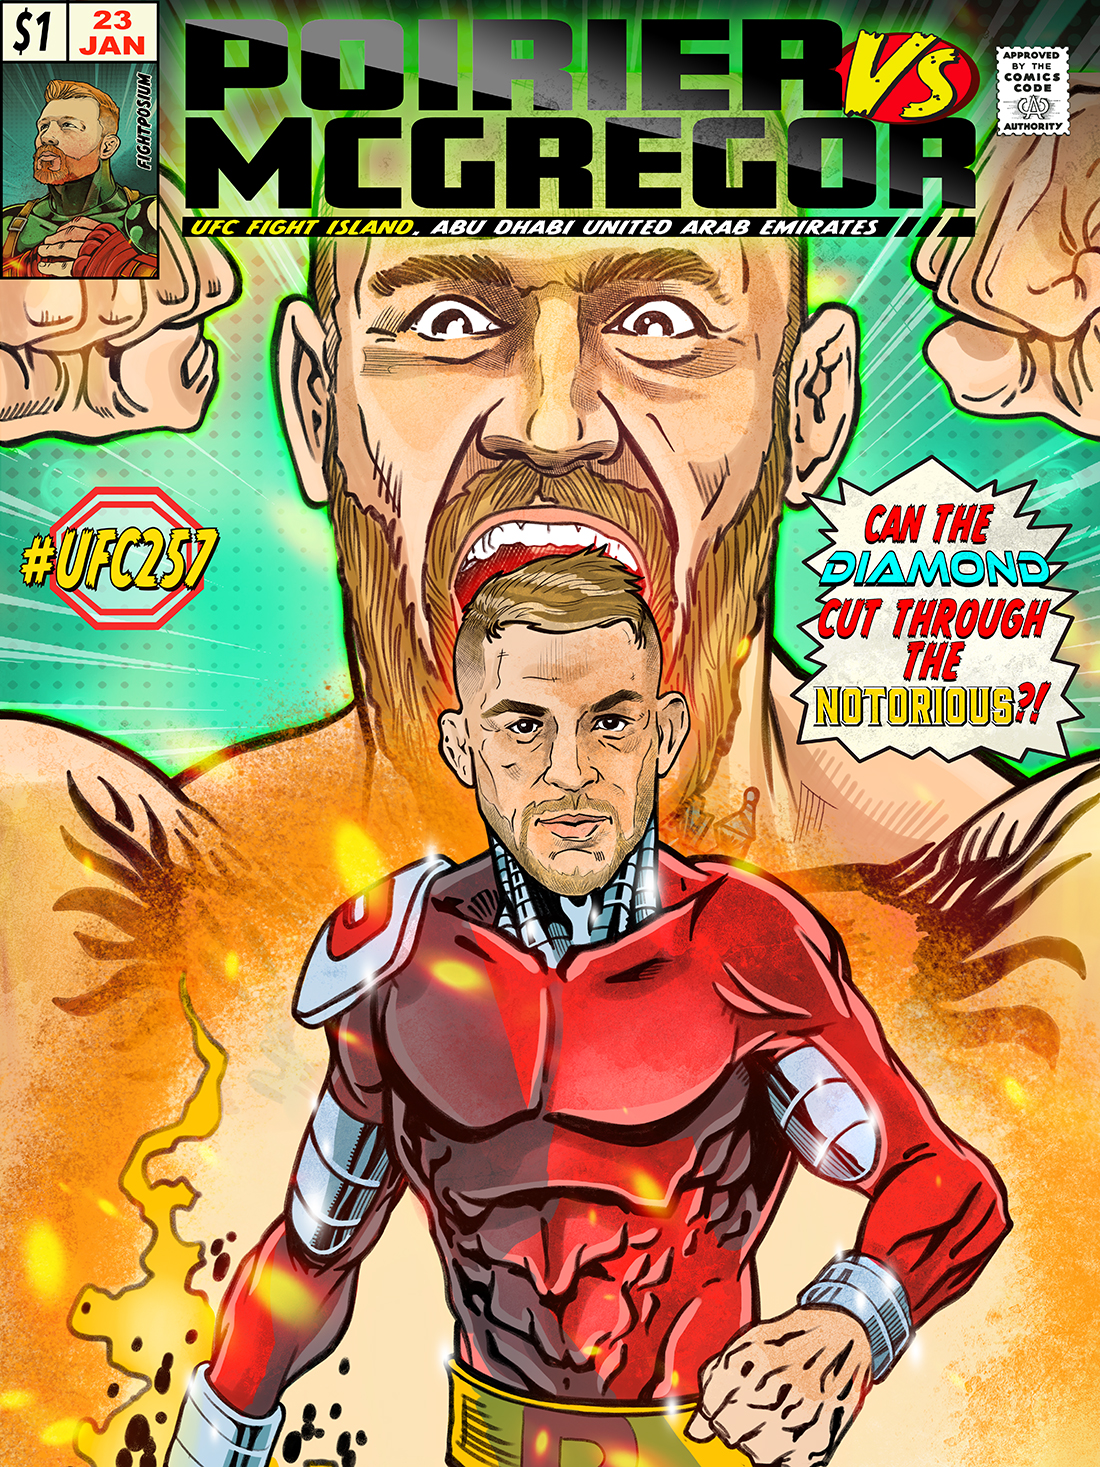 You are currently viewing Poirier vs McGregor II – The Diamond vs The Notorious!